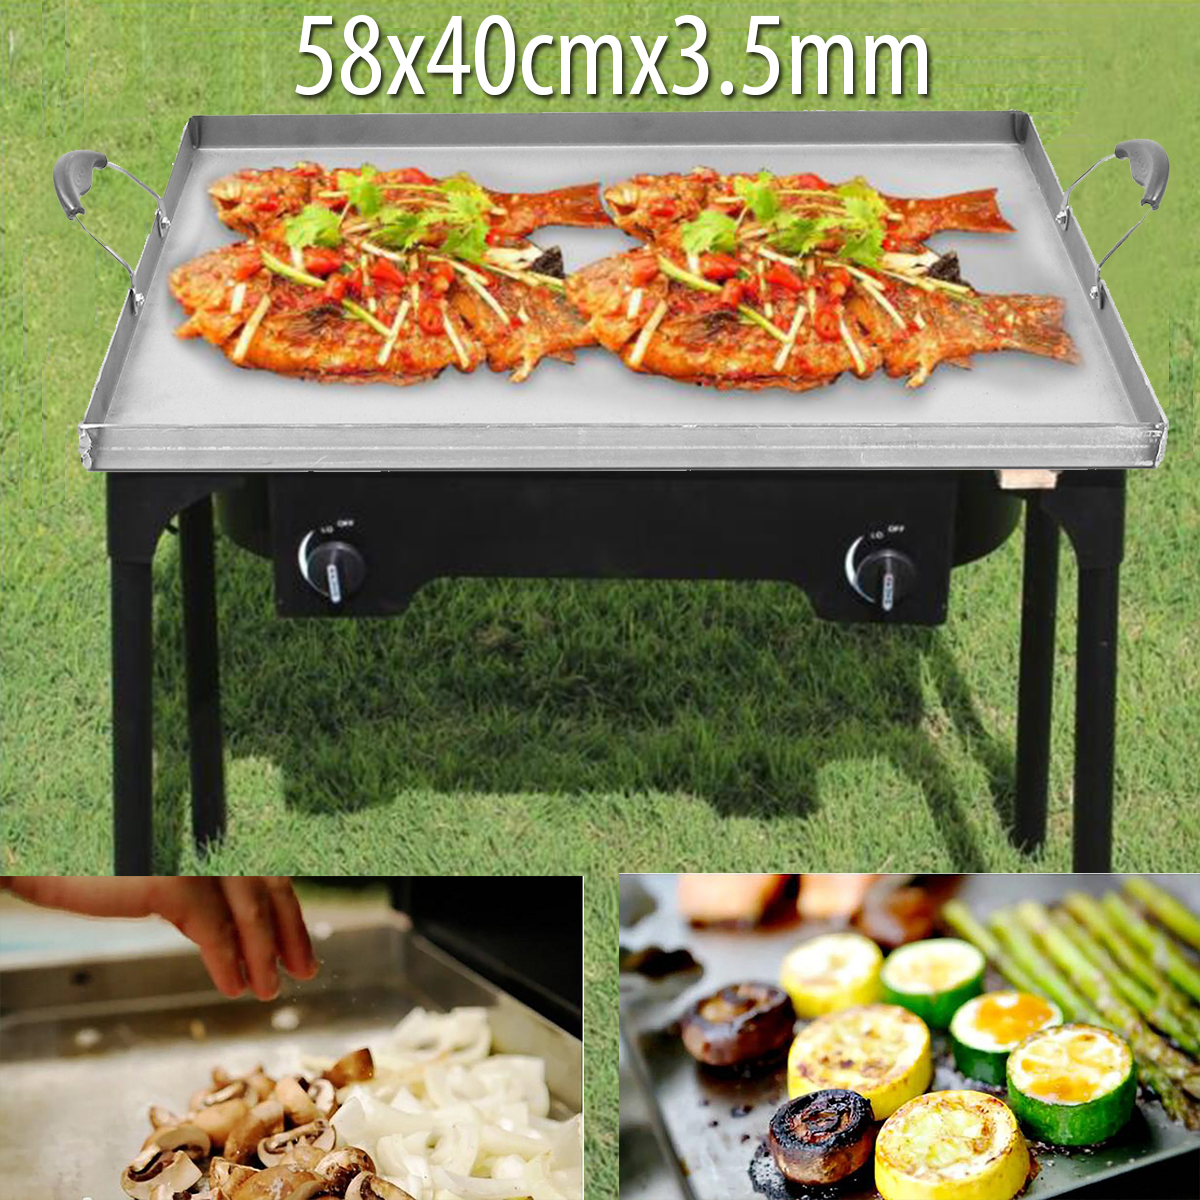 Stainless-Steel-Griddle-Flat-Top-Cooking-BBQ-Grill-Heat-Distribution-Stoves-1347971-1